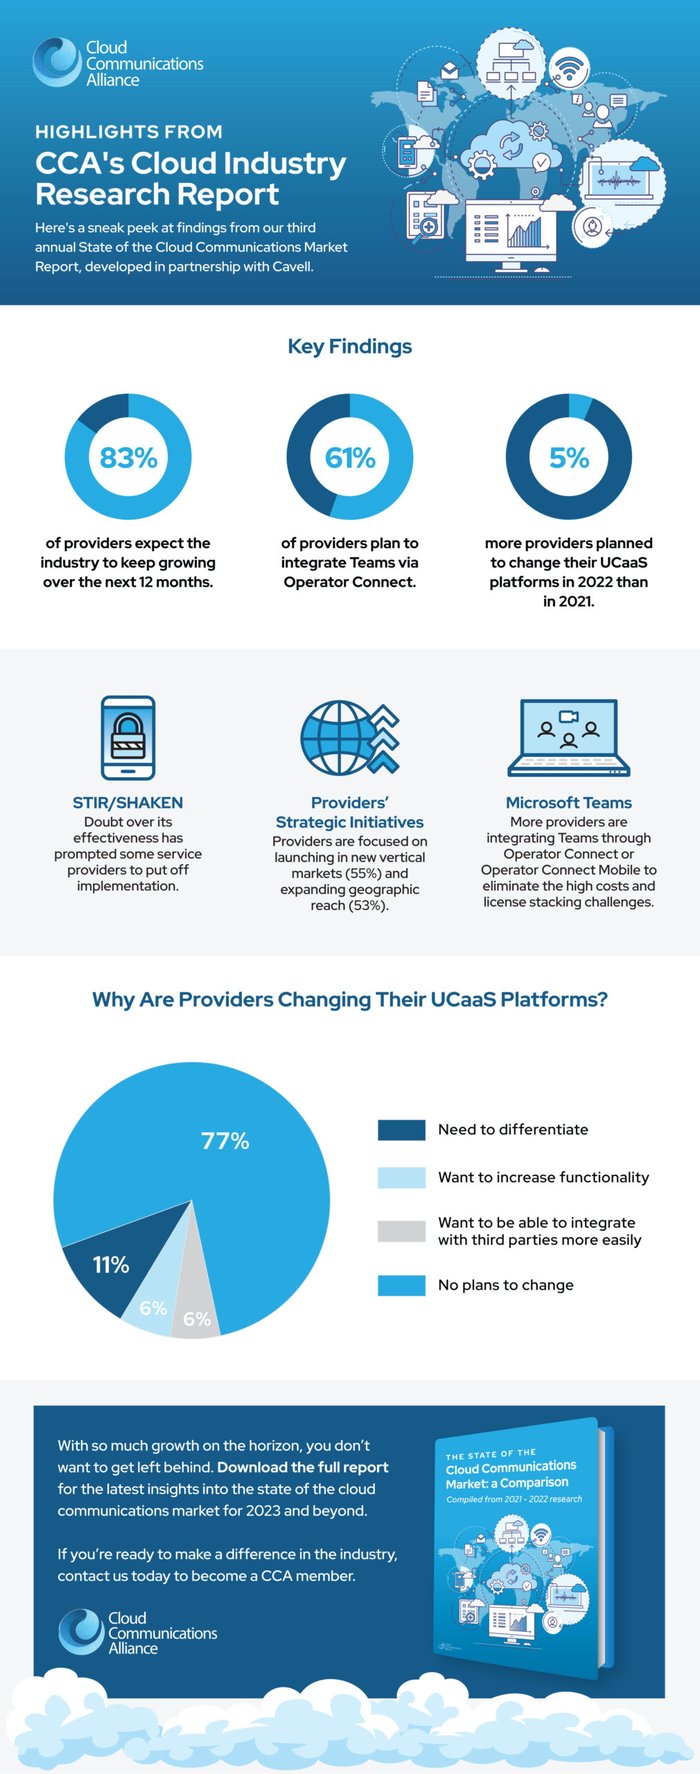 Highlights from CCA's Cloud Industry Research Report